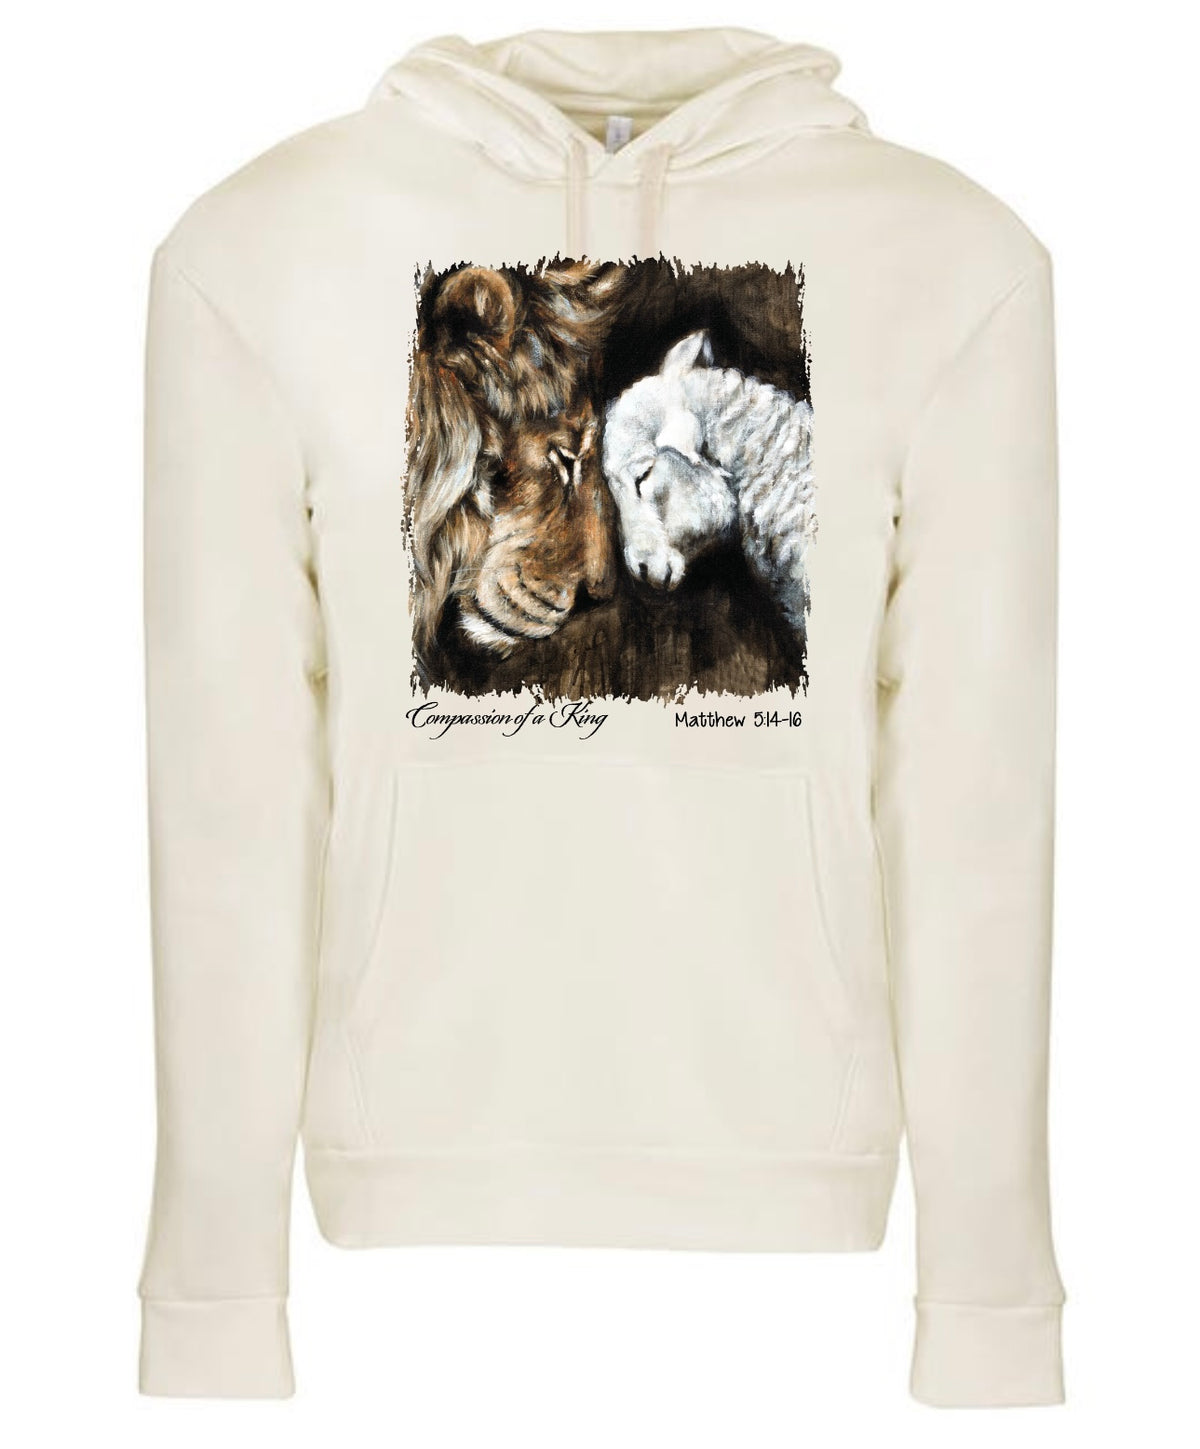 Compassion of a King, Unisex Hooded Sweatshirt